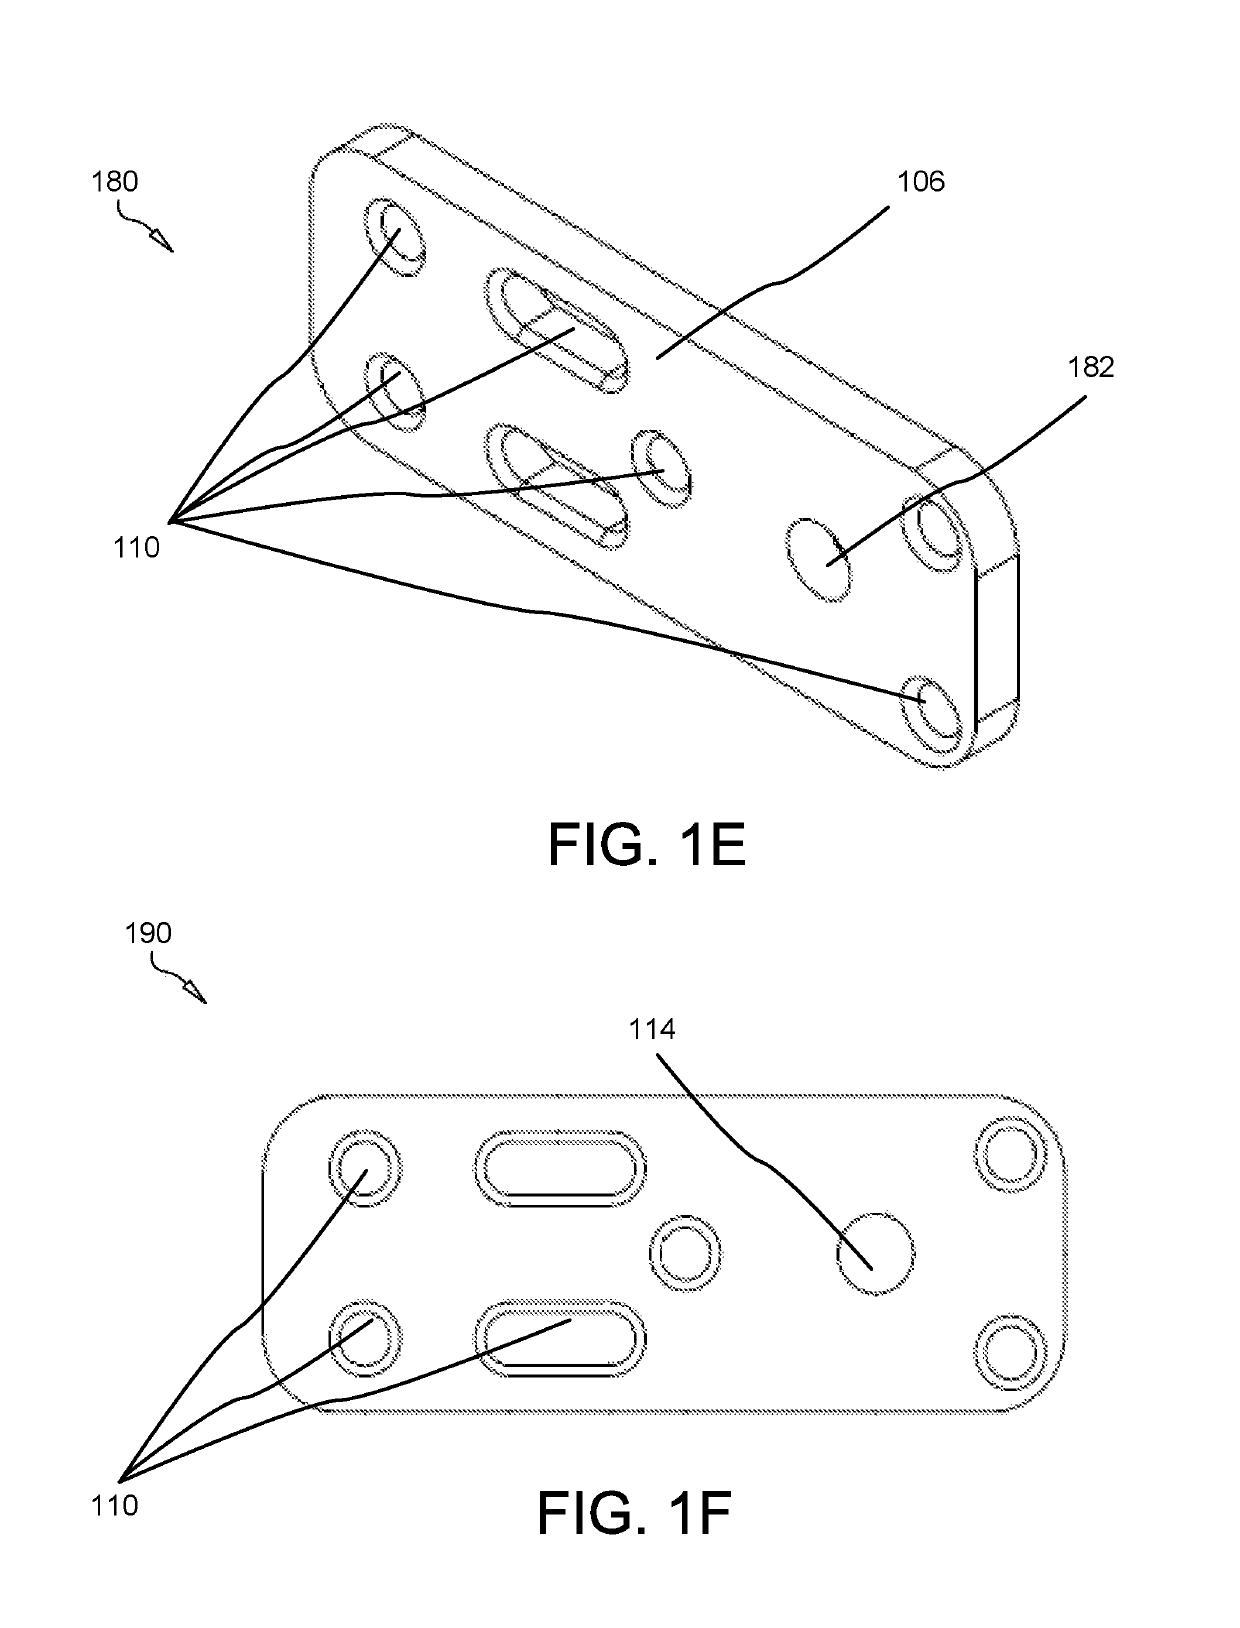 Playless hinge system with releasable hinge pin